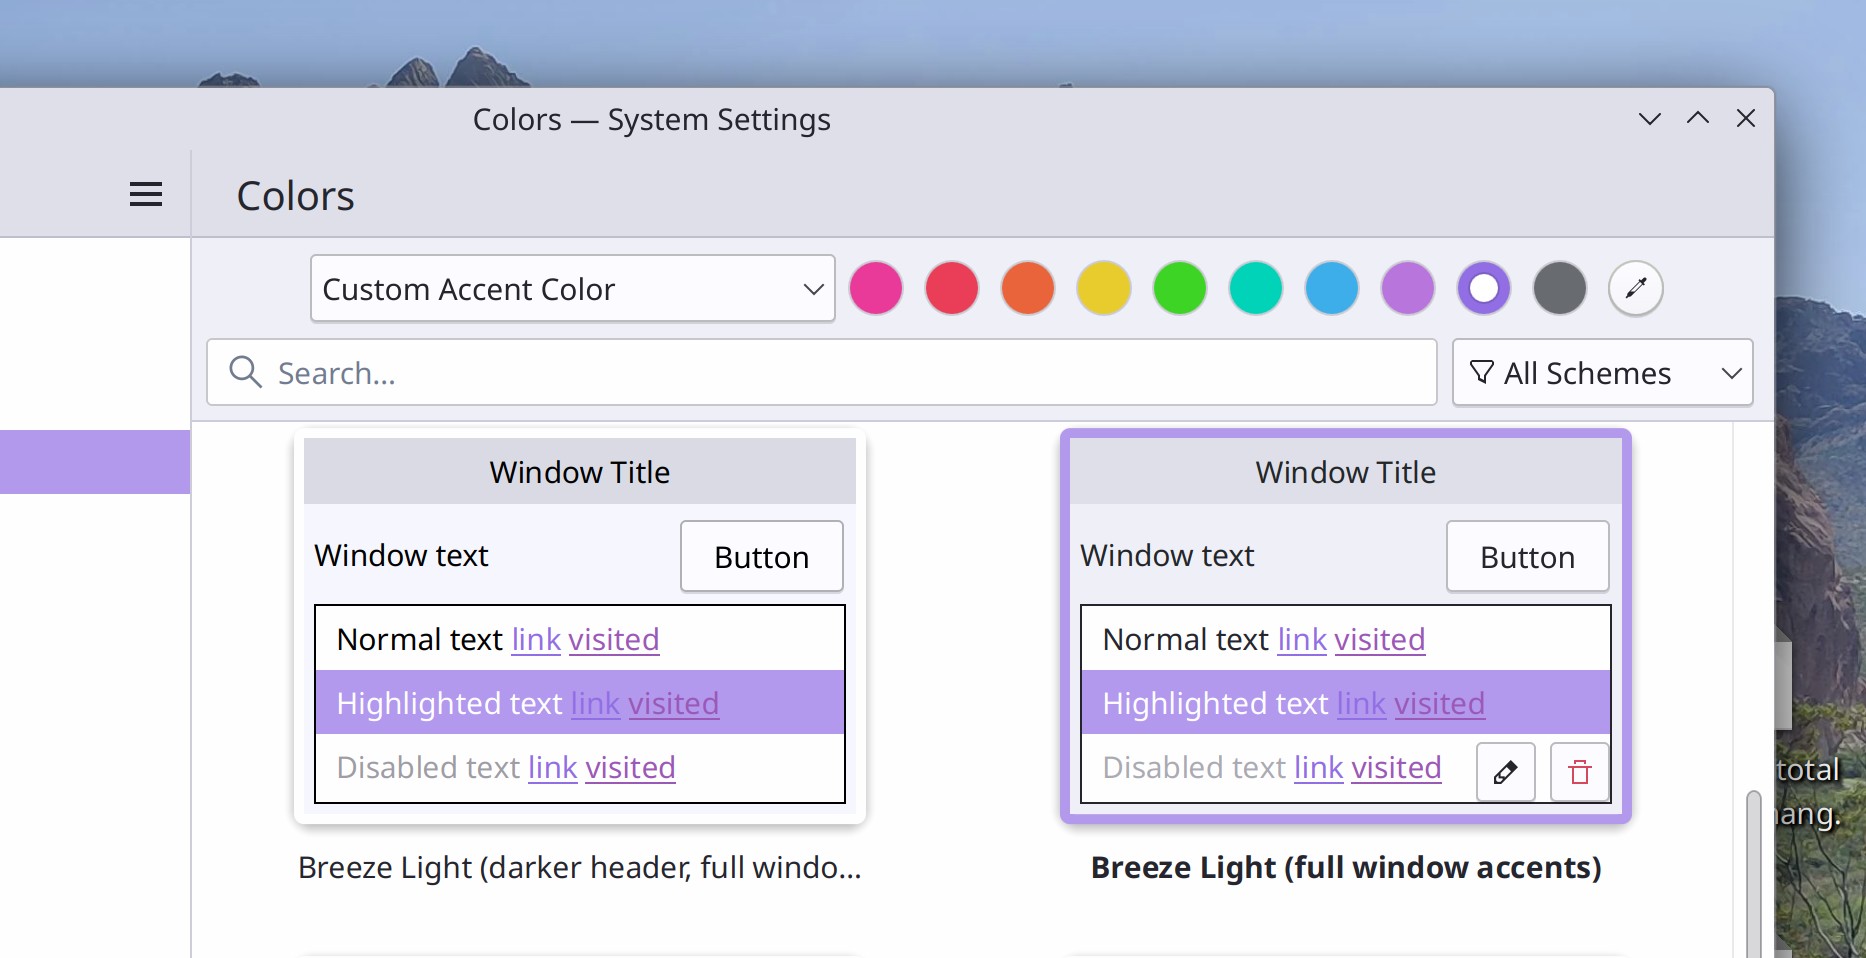 System Settings main window showing Colors page with accent color choosing user interface that fits entirely on one row, with a combobox on the left showing "Custom accent color" and a row of dots beside it, with a purple dot selected